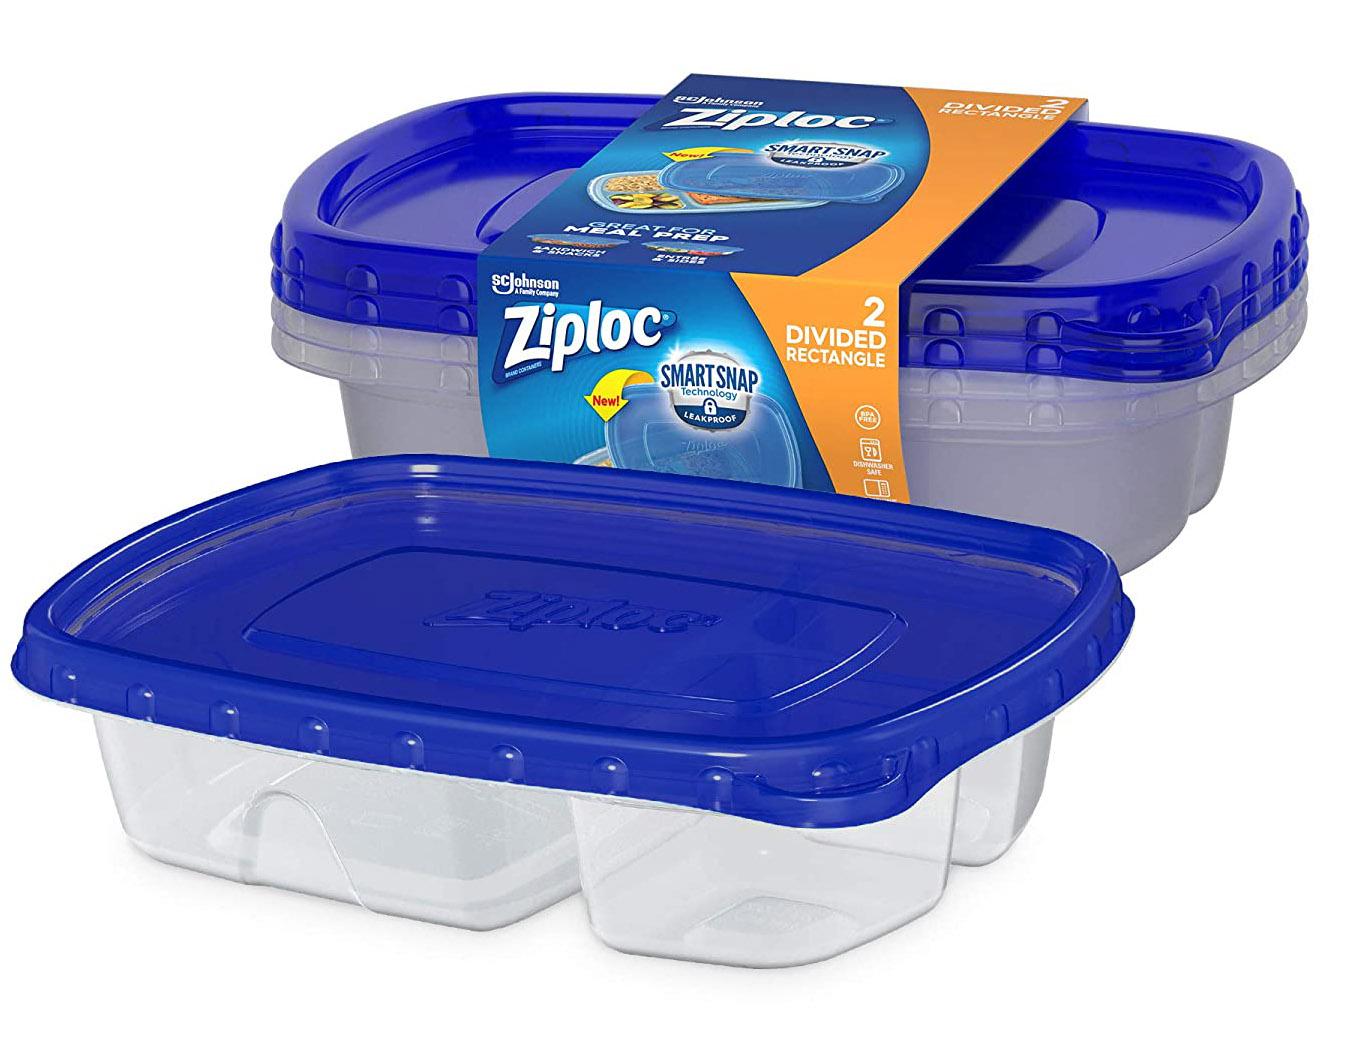 2 Ziploc Food Storage Divided Rectangle Reusable Containers for $1.95 Shipped